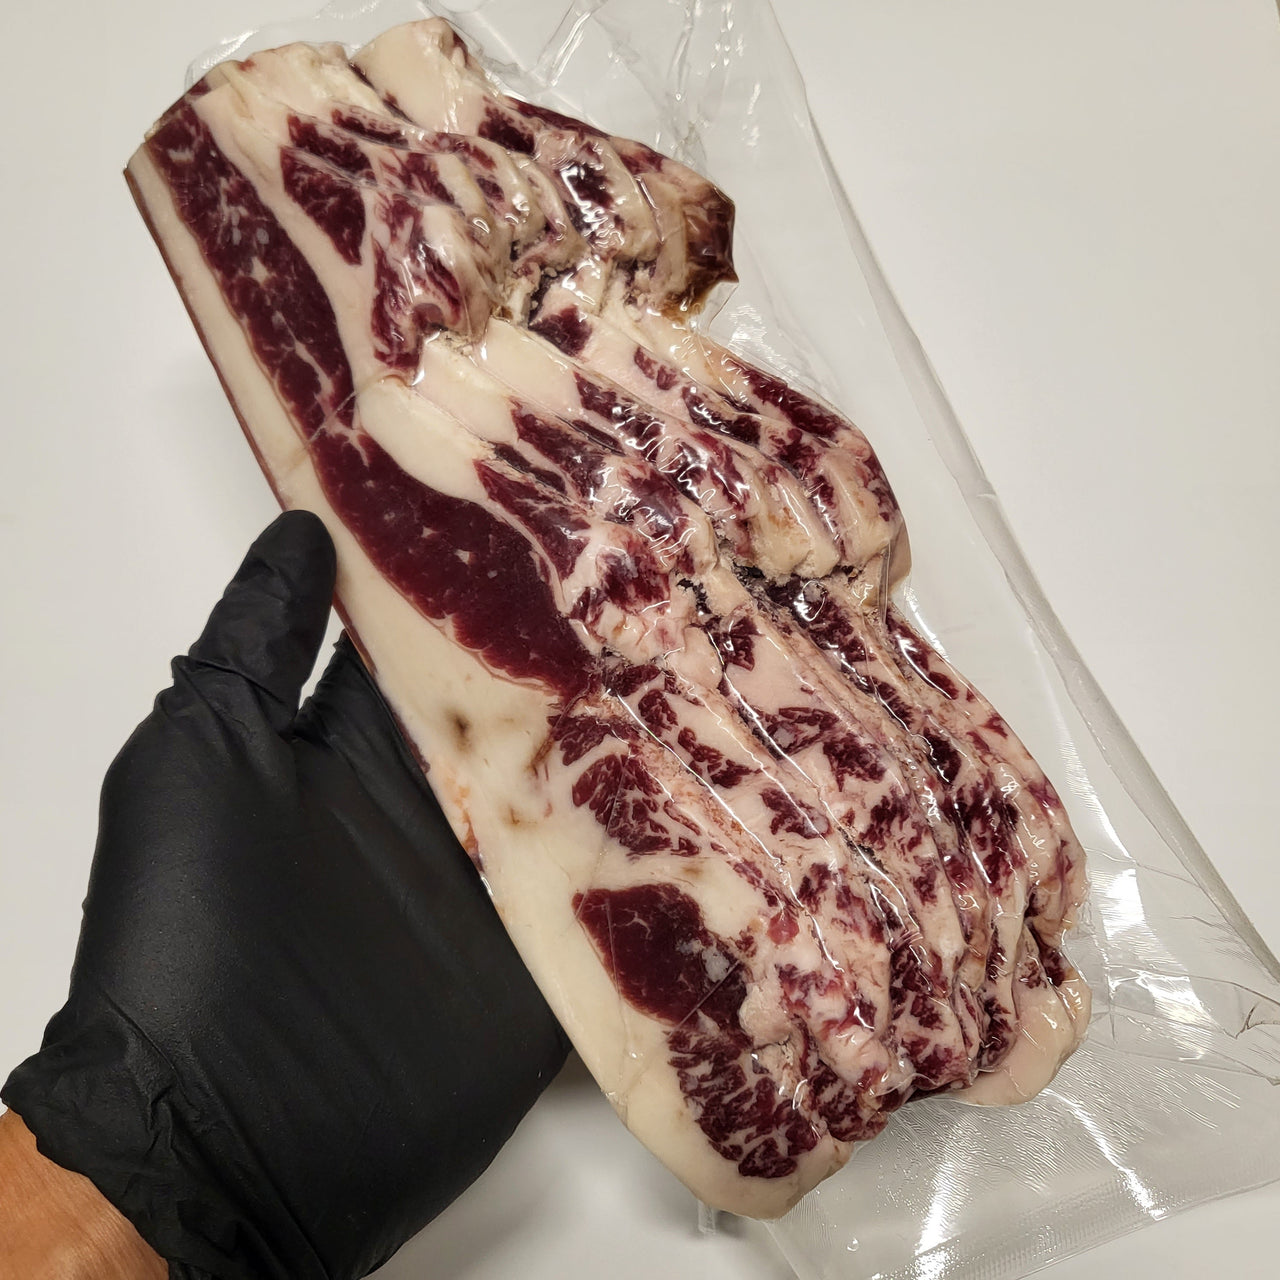 Grassfed Beef Belly Raw, Sliced "Beef Bacon" No Sugar  Japanese Akaushi (Brown aka: Red) Wagyu Beef Full Blood AGED 21+ Days Grass Fed & Grass Finished approx. 3/4 lb / pkg